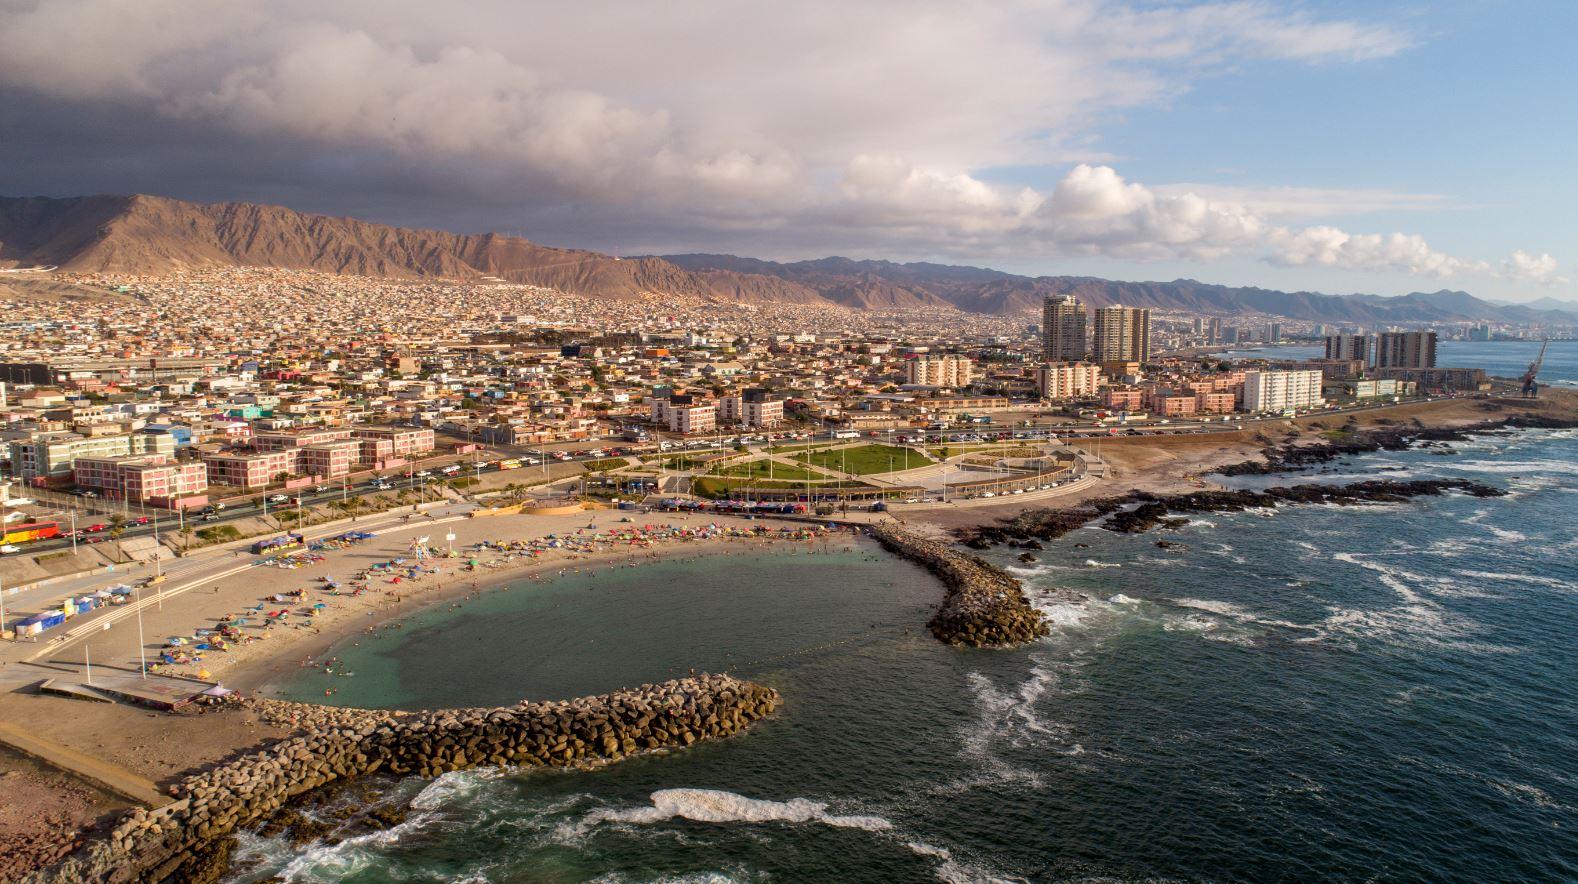 Aerial view of coastal city in Chile